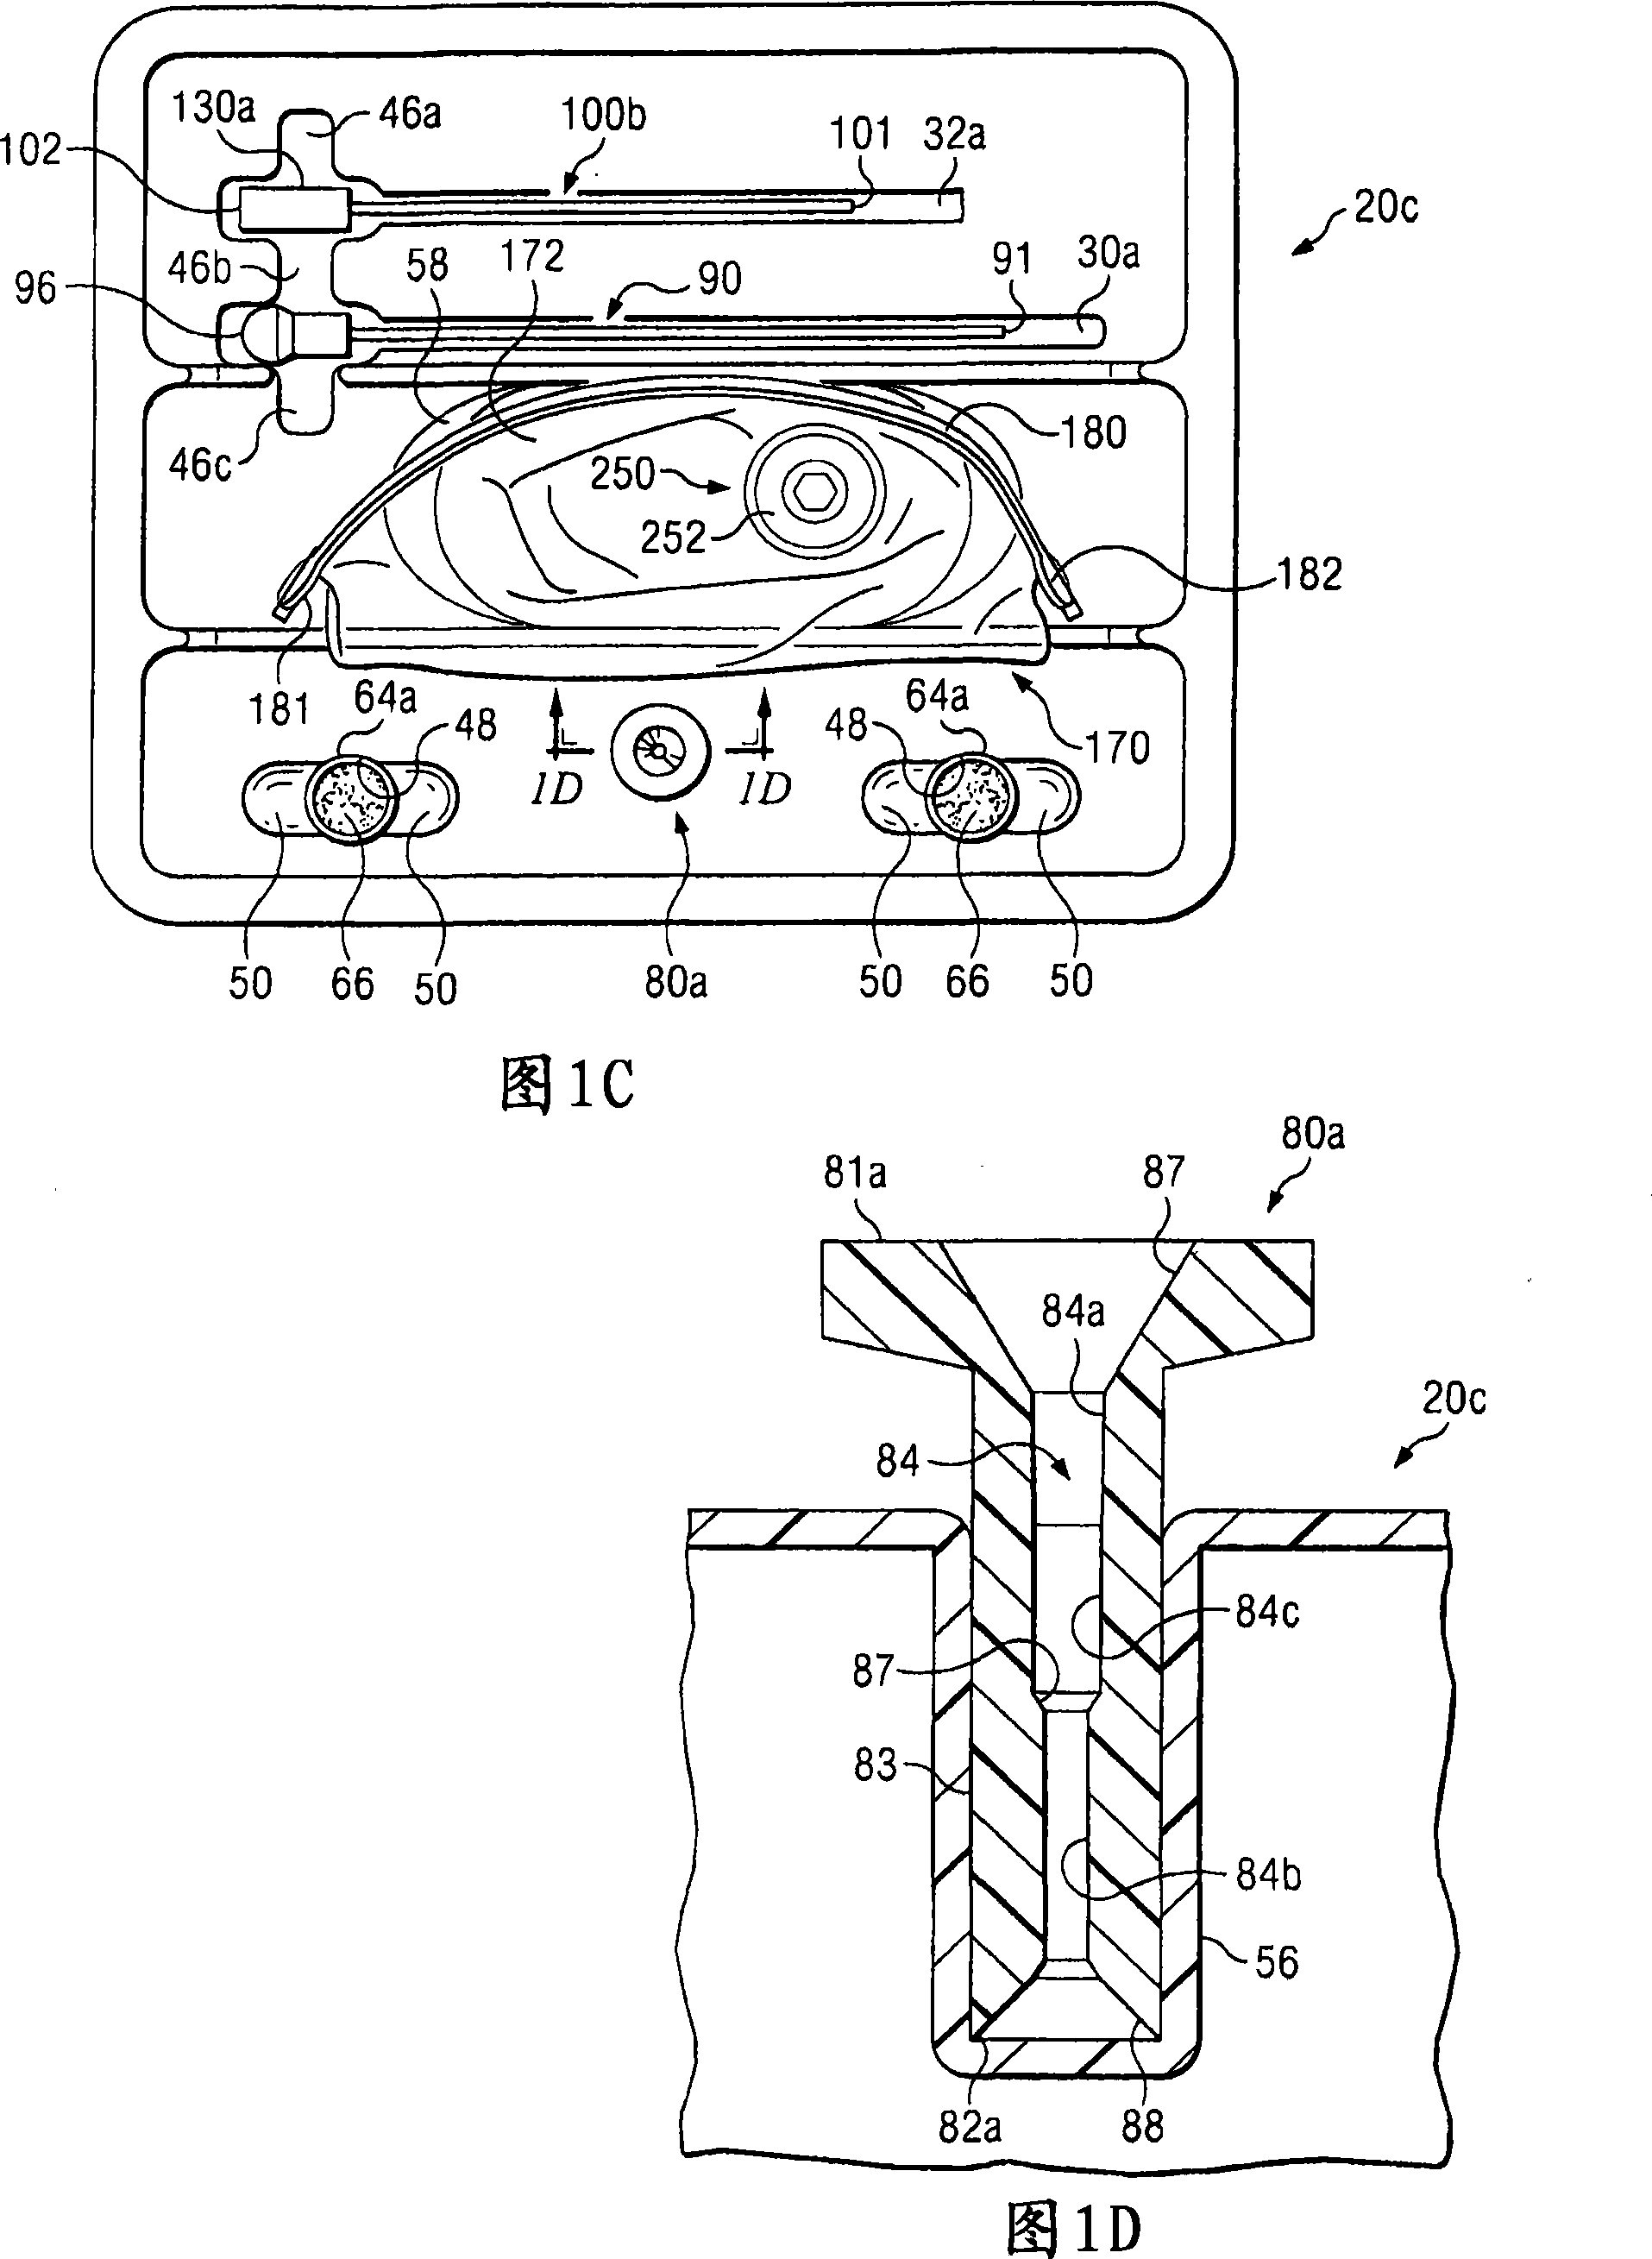 Apparatus and methods for biopsy and aspiration of bone marrow